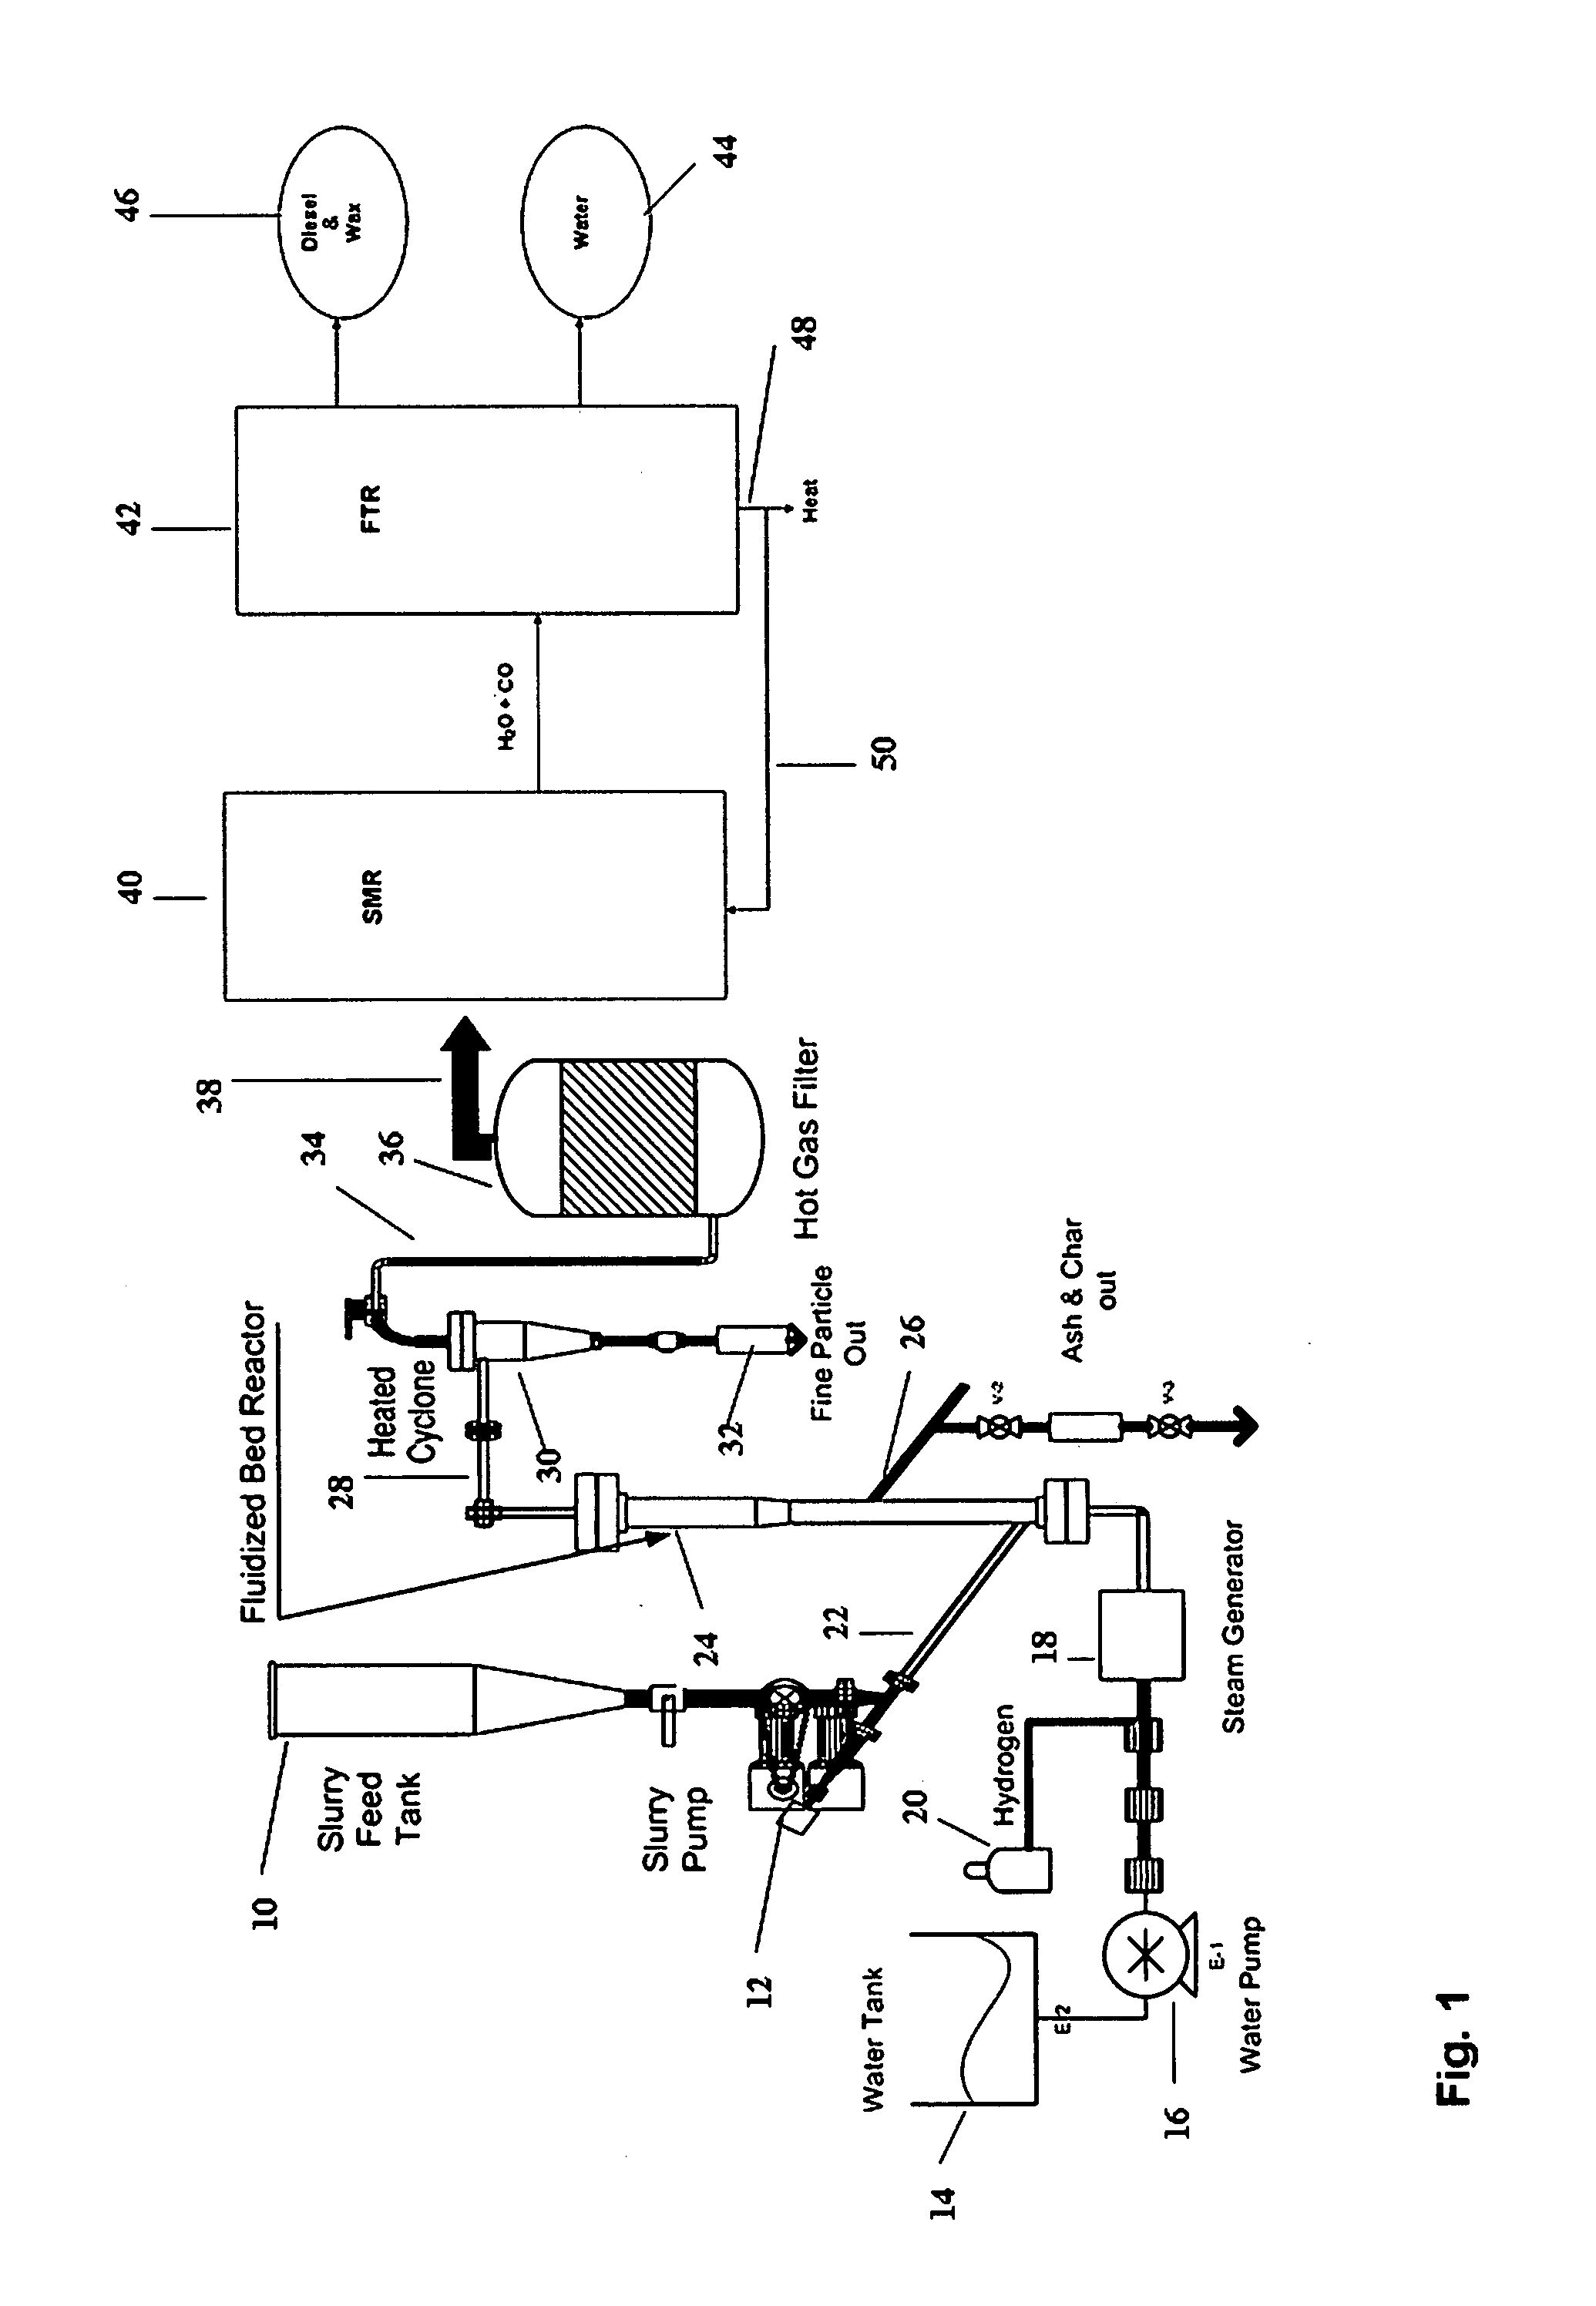 Method and apparatus for steam hydro-gasification in a fluidized bed reactor